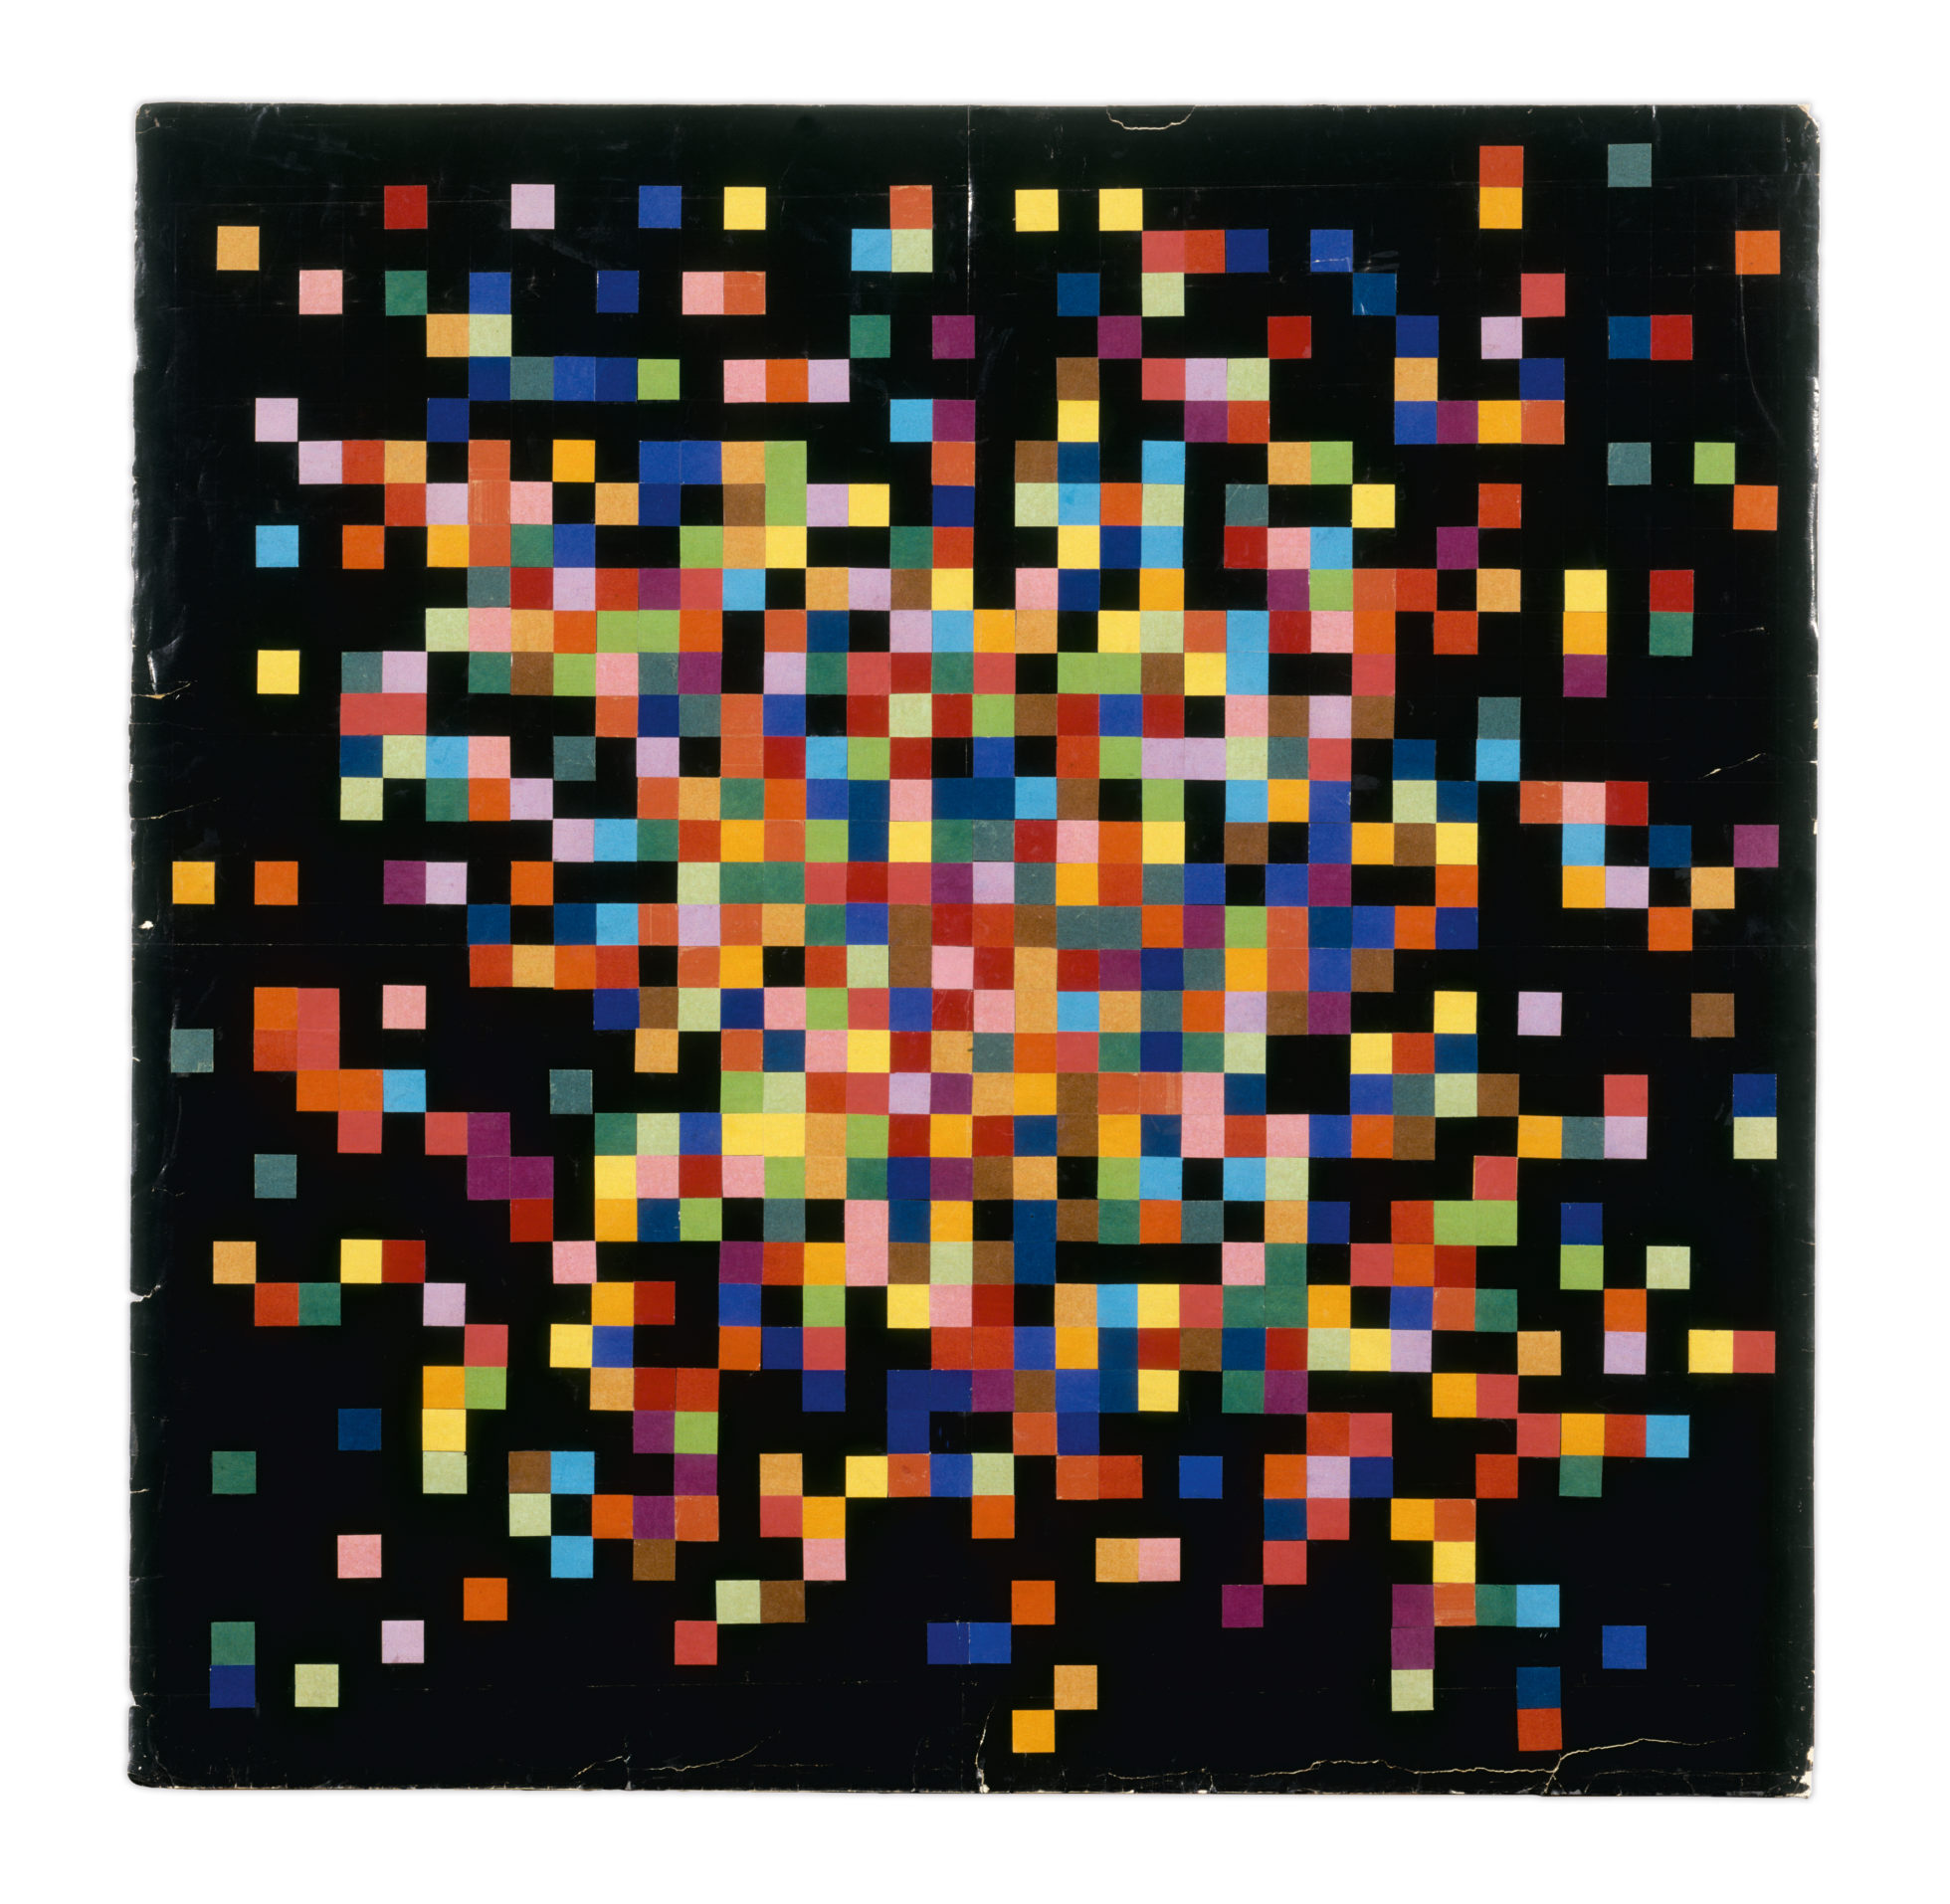 Ellsworth Kelly’s Spectrum Colors Arranged by Chance IV